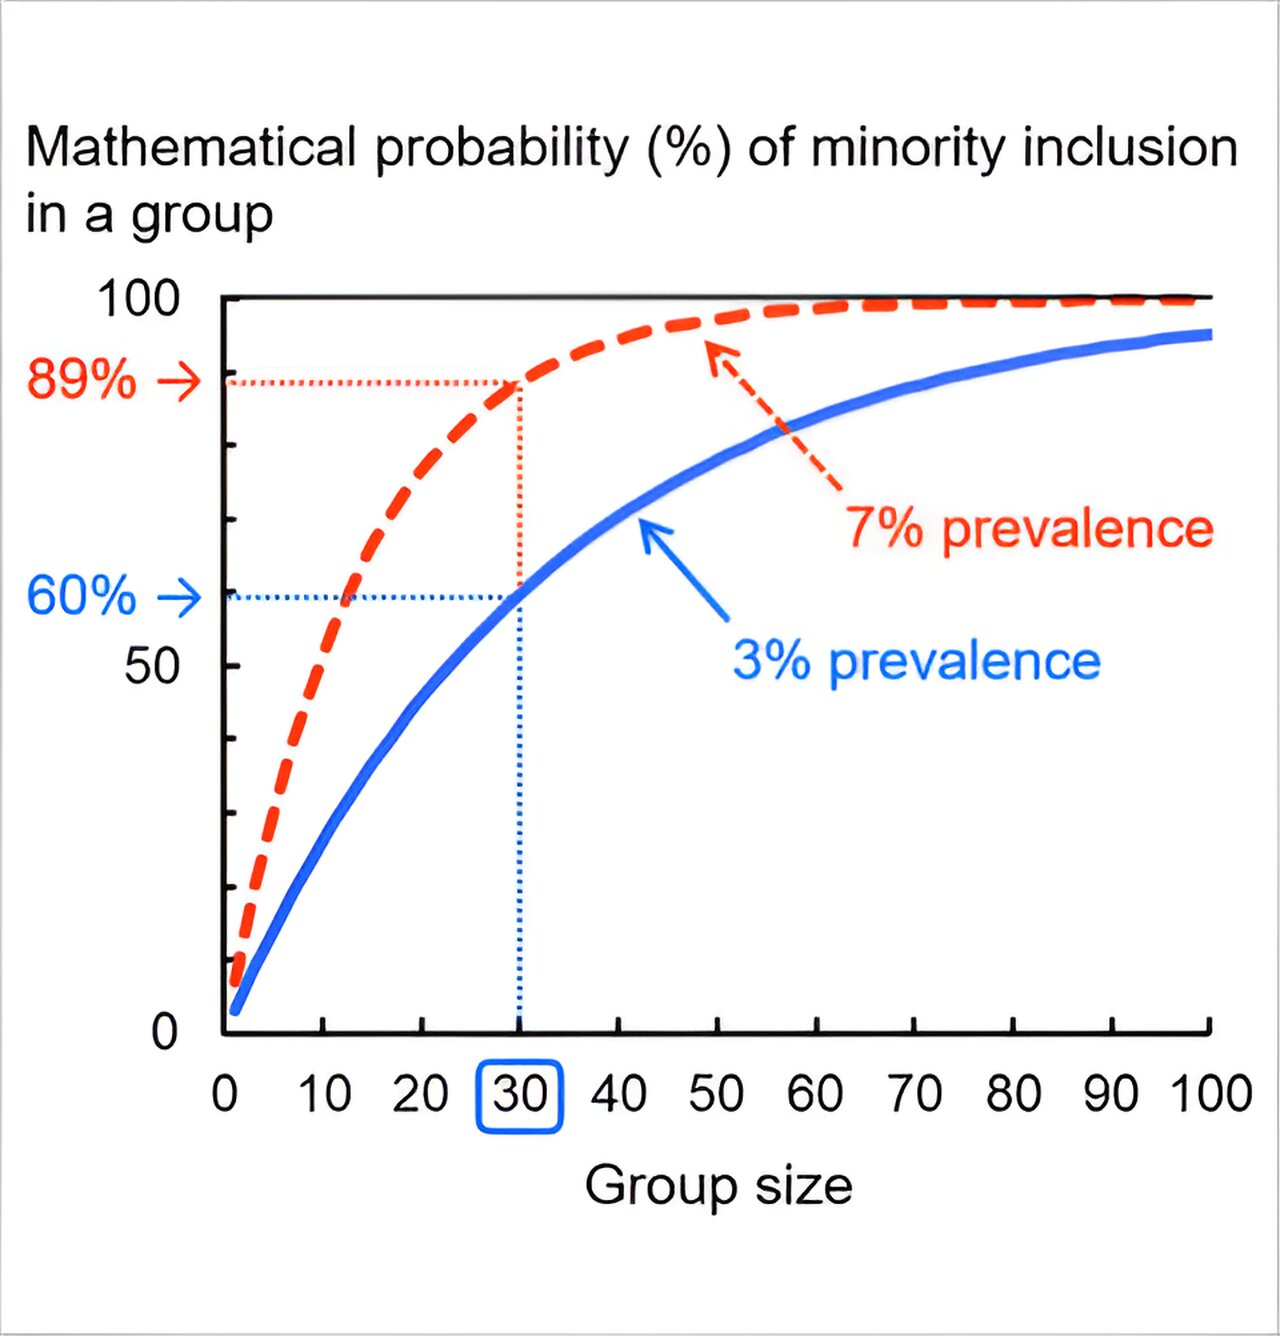 People underestimate the probability of including at least one minority member in a group, research suggests